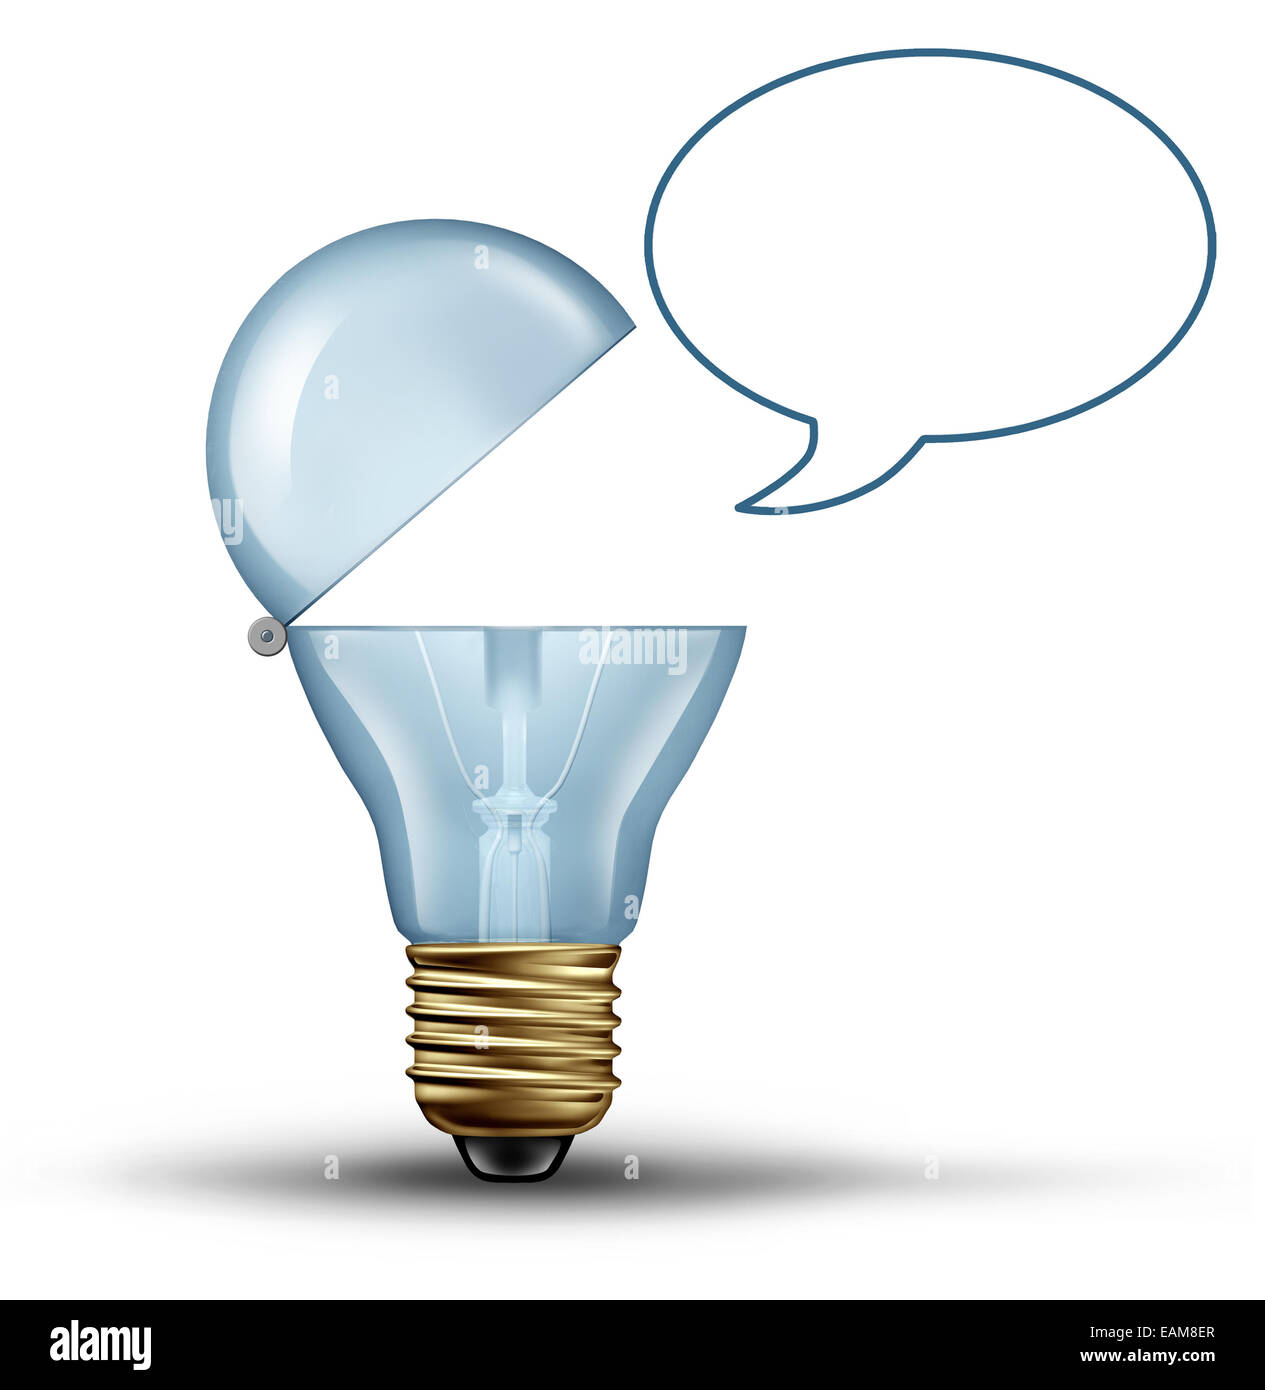 Idea communication concept as a lightbulb with an open mouth talking wth a blank speech bubble as a creative symbol for communicating innovative thinking through the use of marketing and social media on a white background. Stock Photo